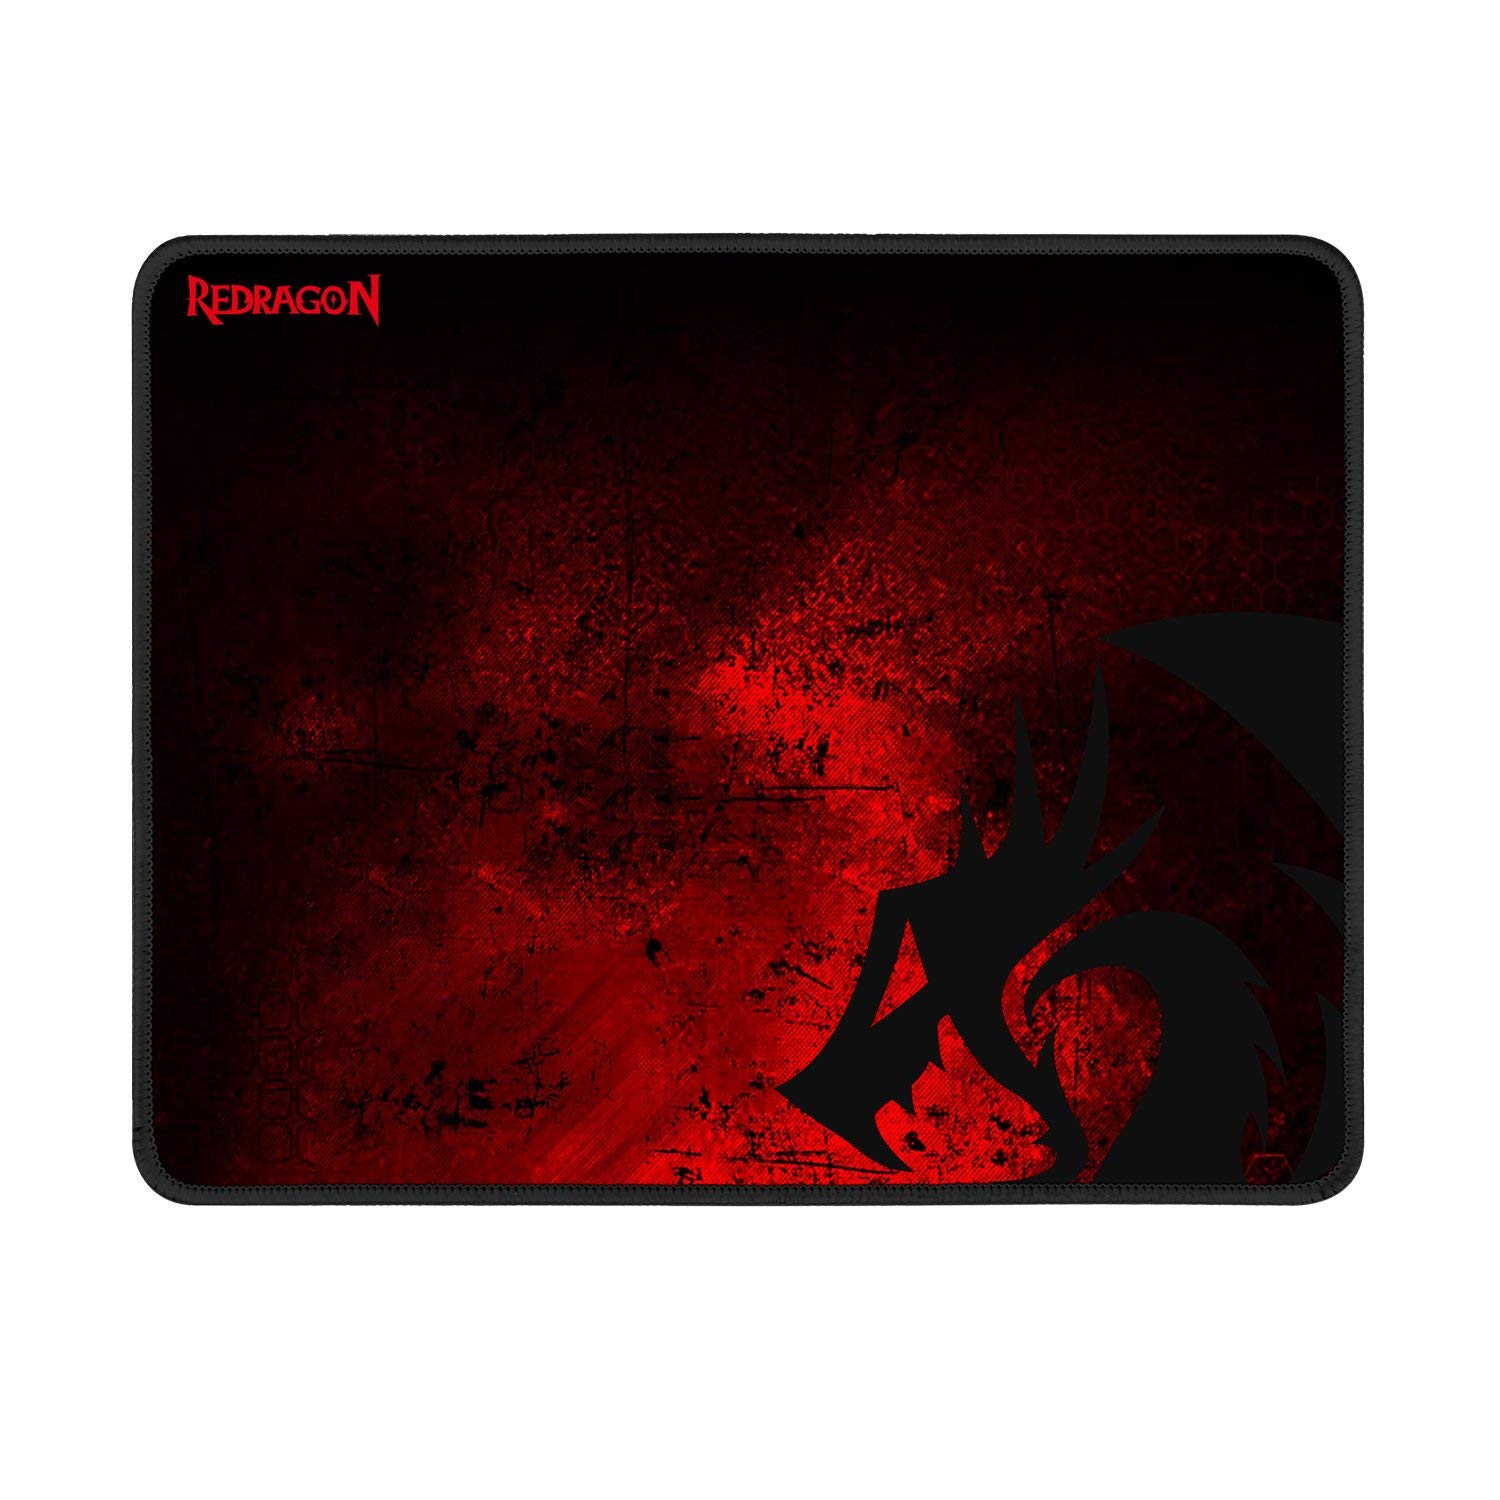 redragon-pisces-gaming-mouse-pad-330x260x3mm-1-image